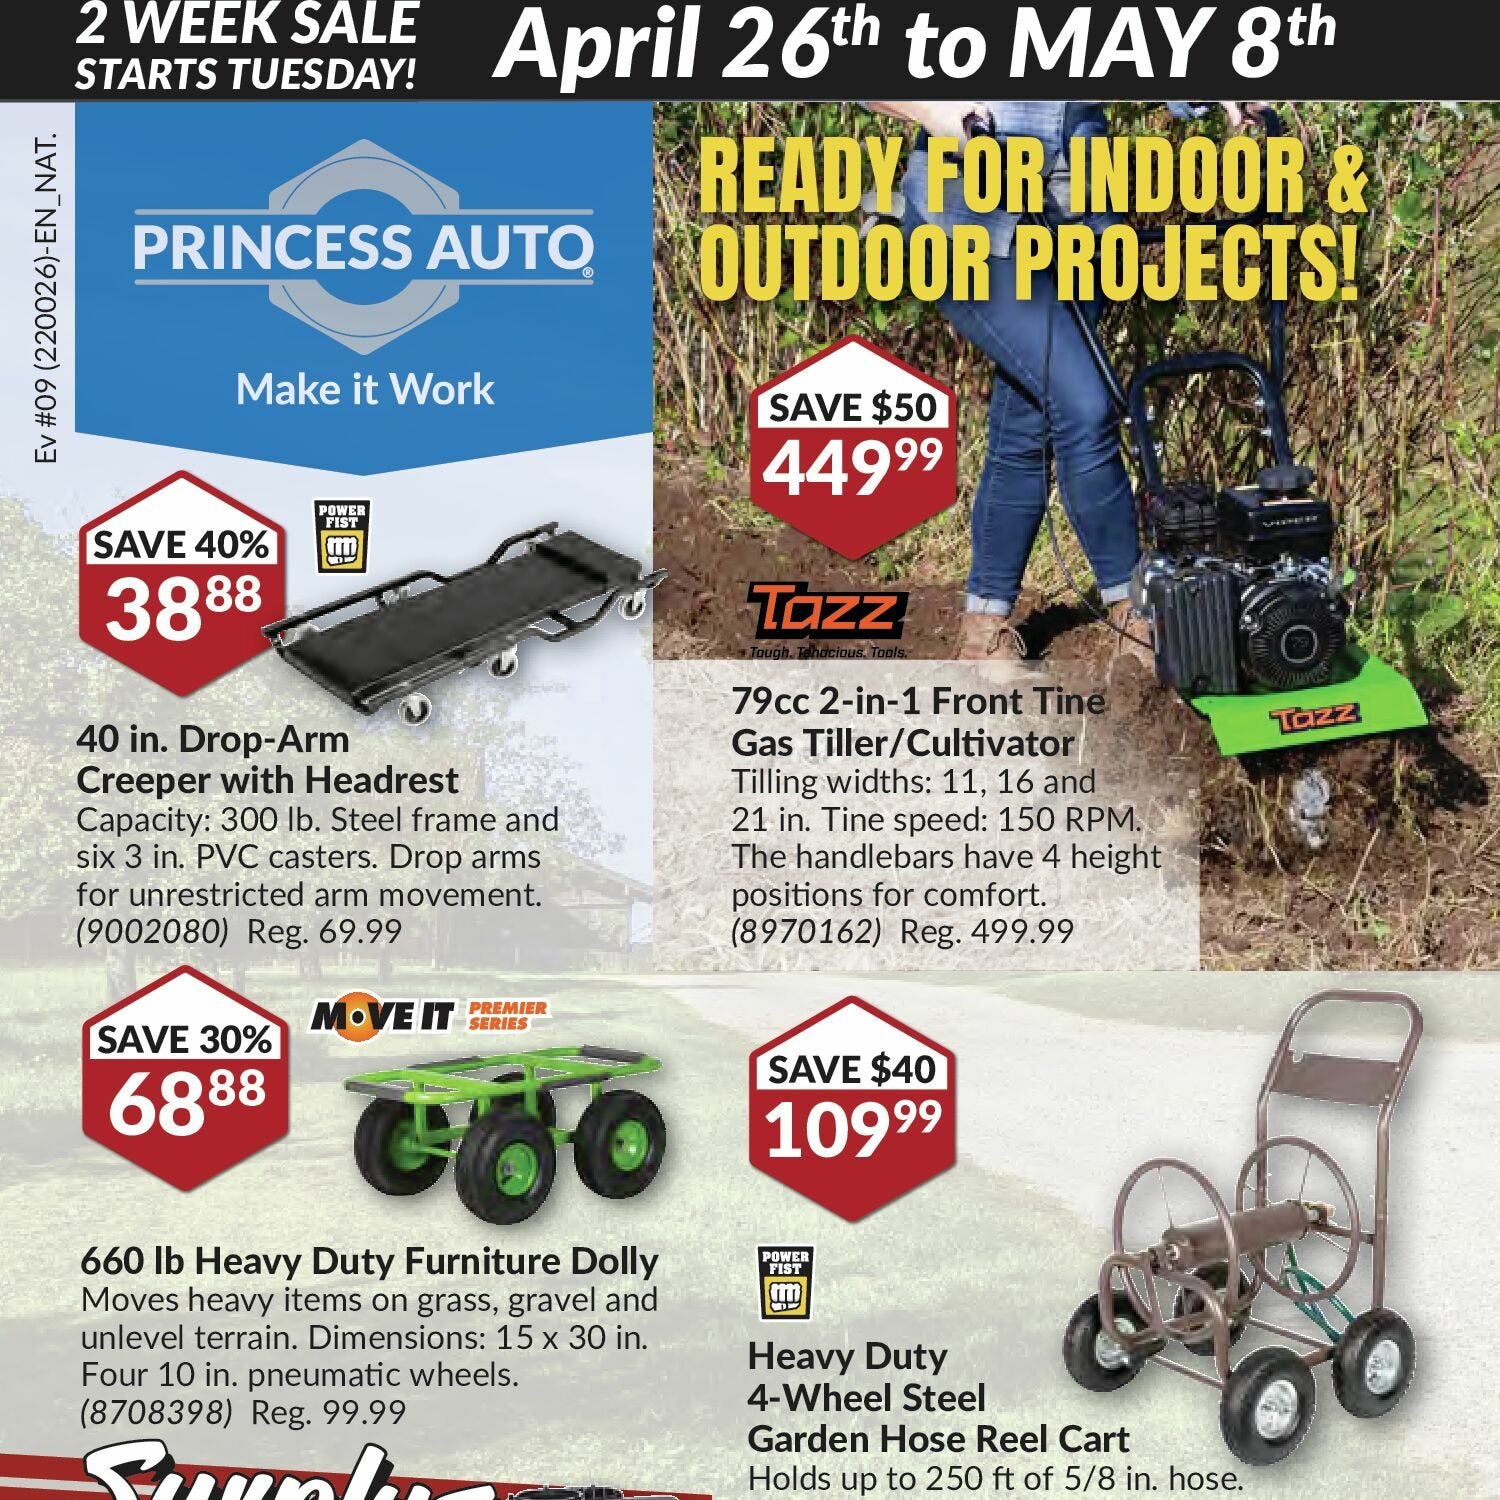 Princess Auto Weekly Flyer - 2 Week Sale - Ready For Indoor